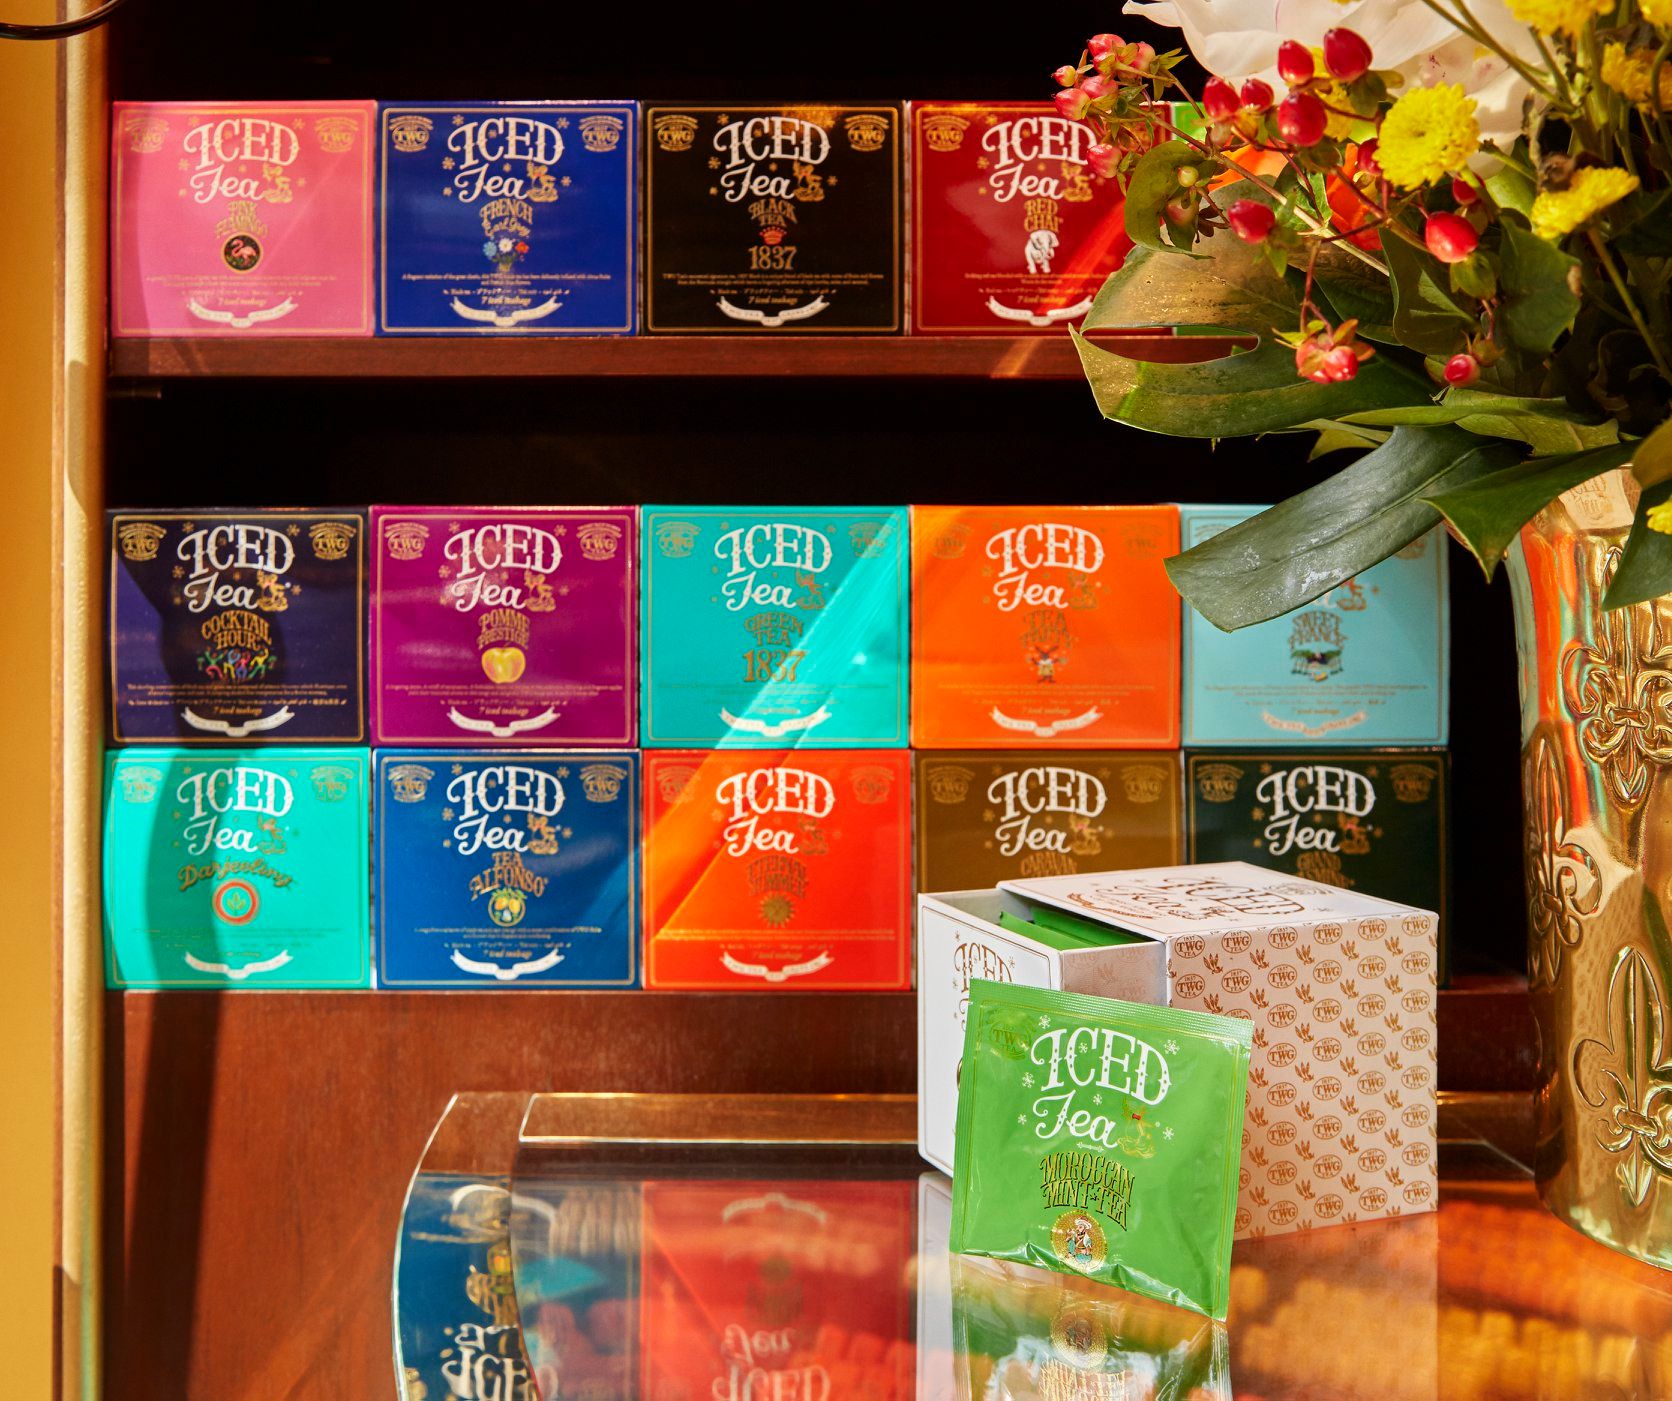 The iced tea collection comes in fifteen varieties of whole tea leaves carefully proportioned and packaged for the expert preparation of delicious TWG iced teas. For a limited time only, enjoy 50% off! Shop now at TWGTea.Com.